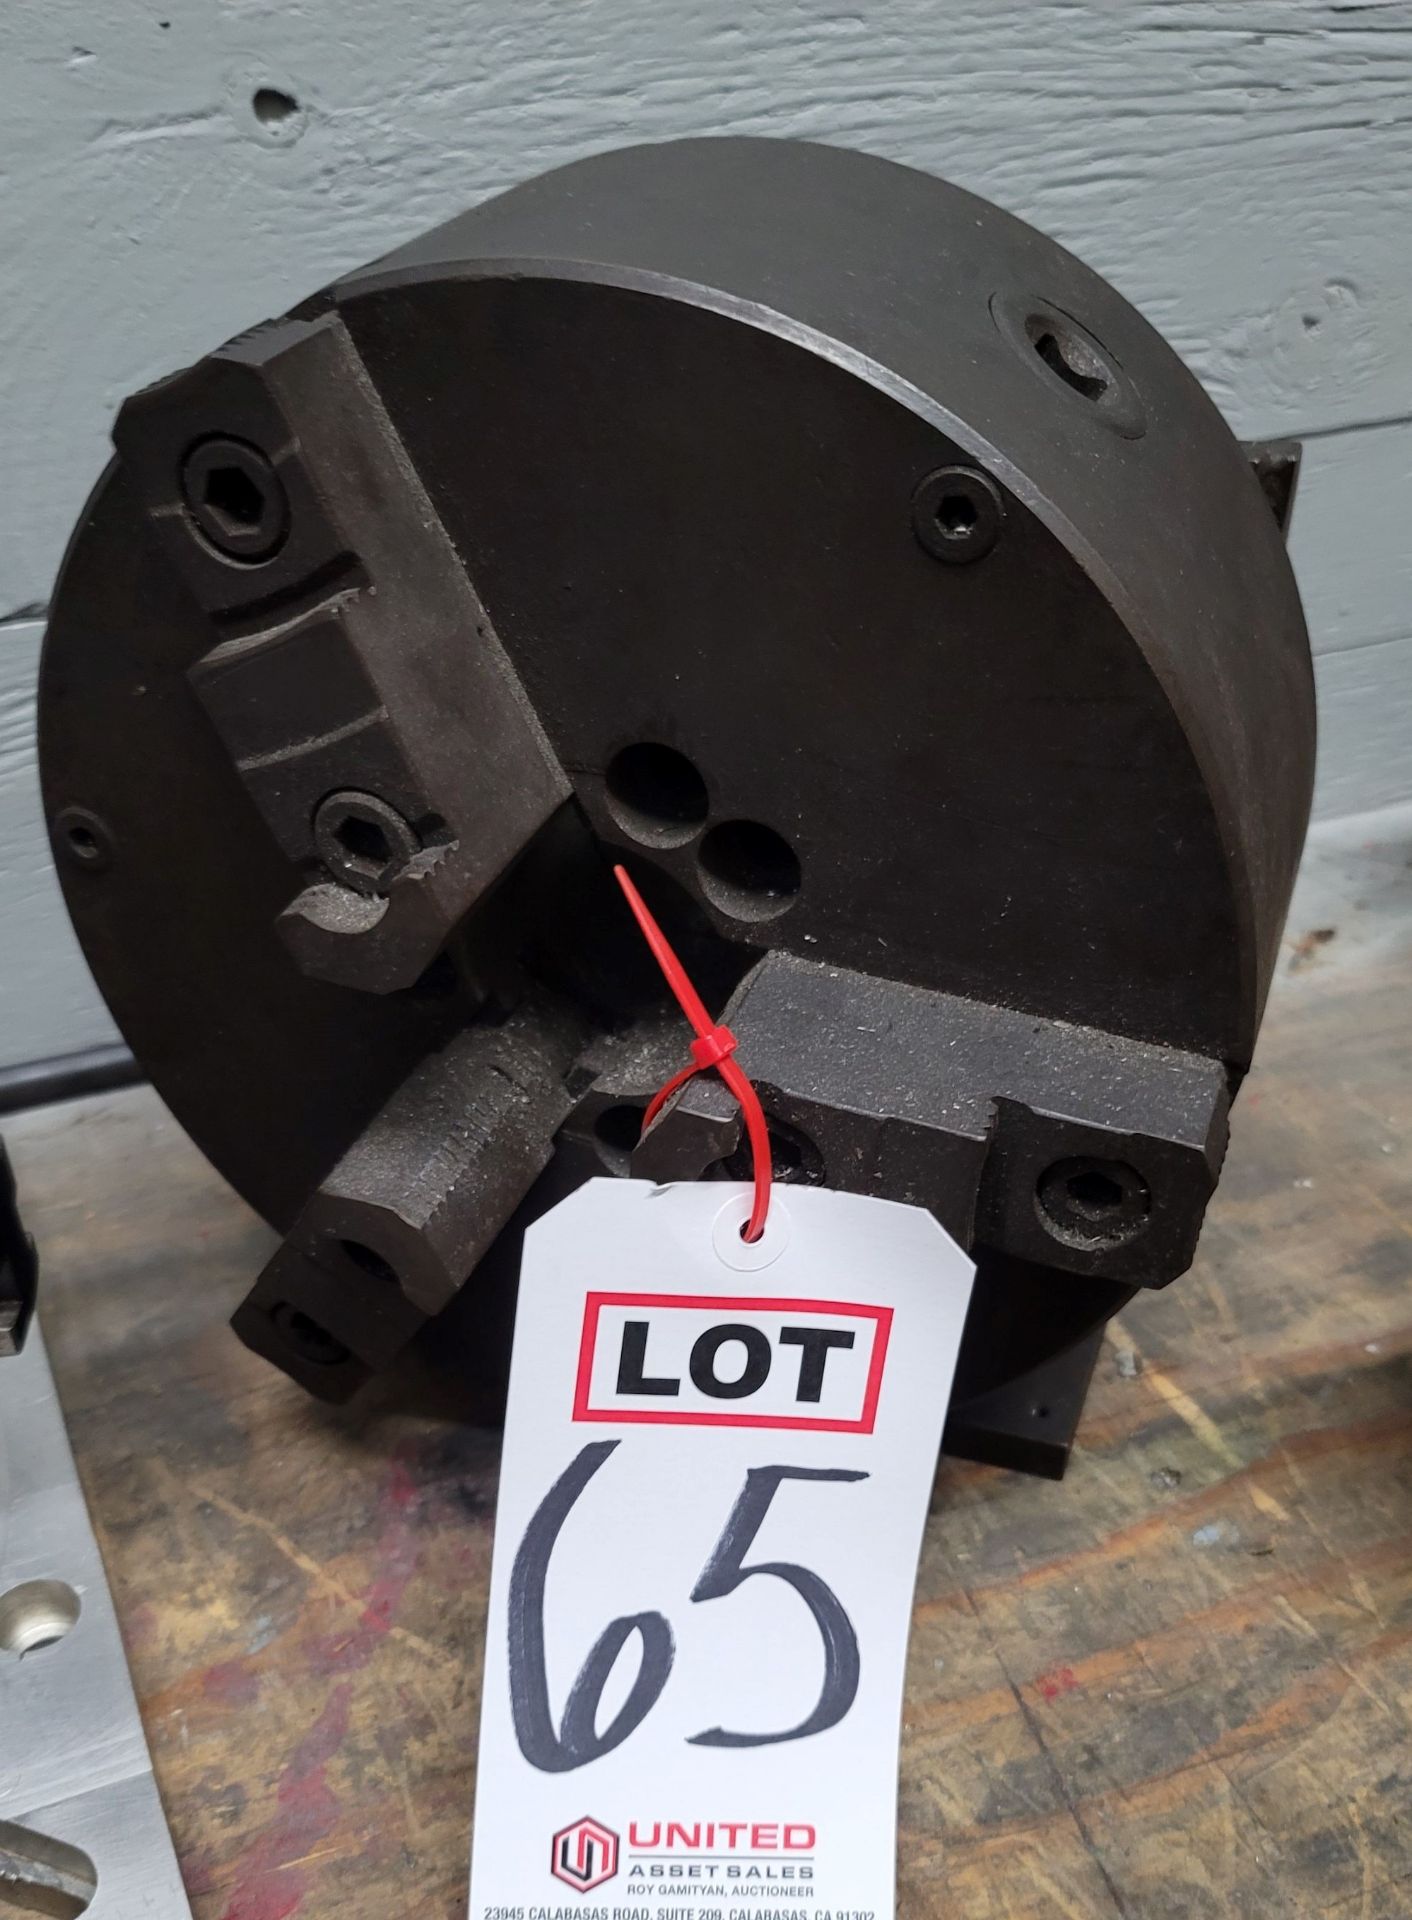 10" 3-JAW CHUCK, SELF-CENTERING, MOUNTED ON VERTICAL STAND